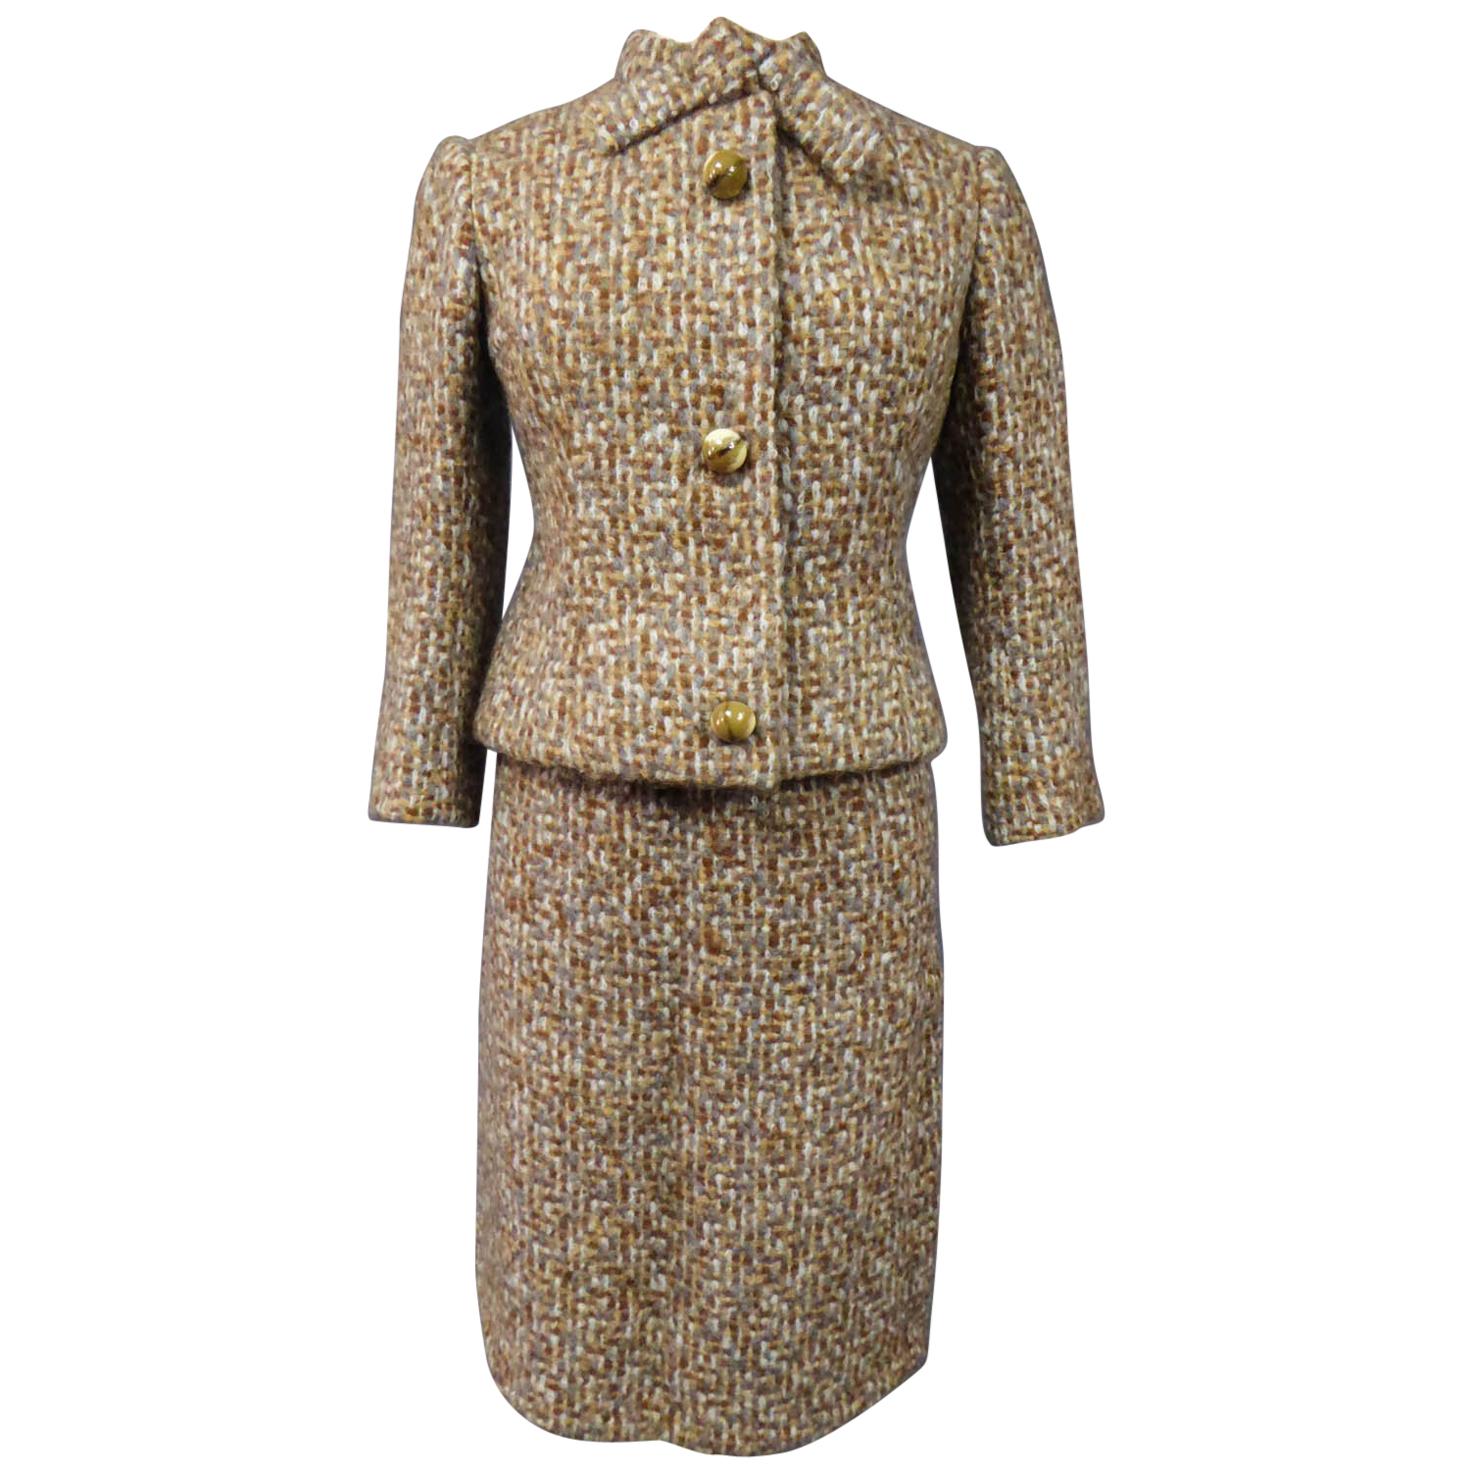 French Patron Christian Dior/Berenice skirt suit  - Demi Couture Circa 1962/1965